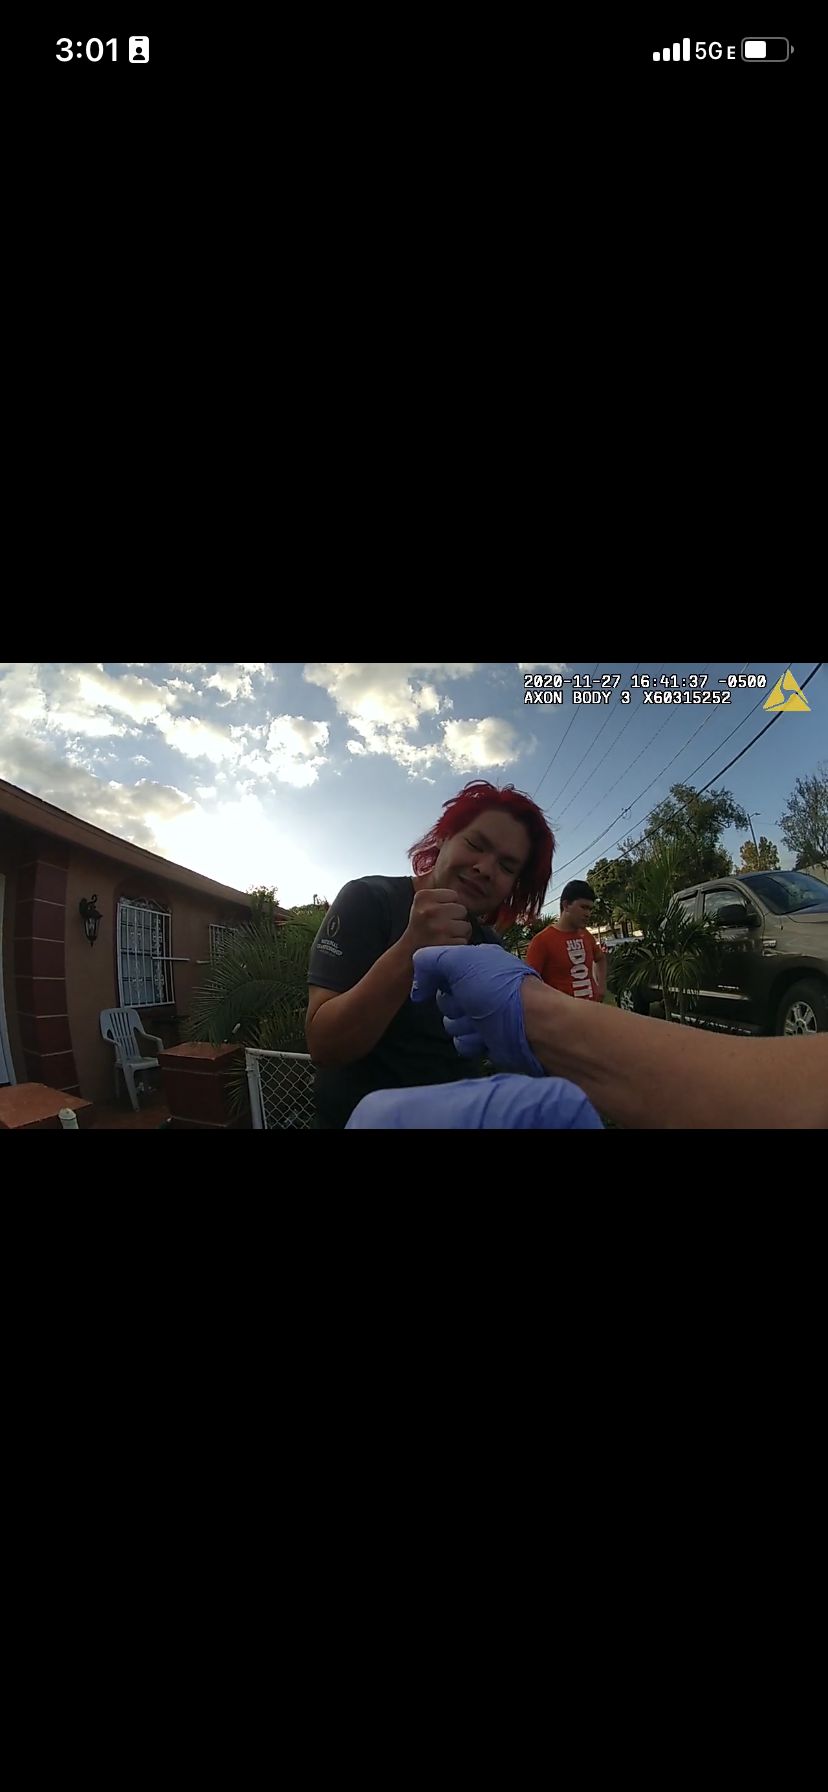 Bodycam Video Shows Florida Deputy Choking Unarmed Trans Woman During Arrest HuffPost Latest News image